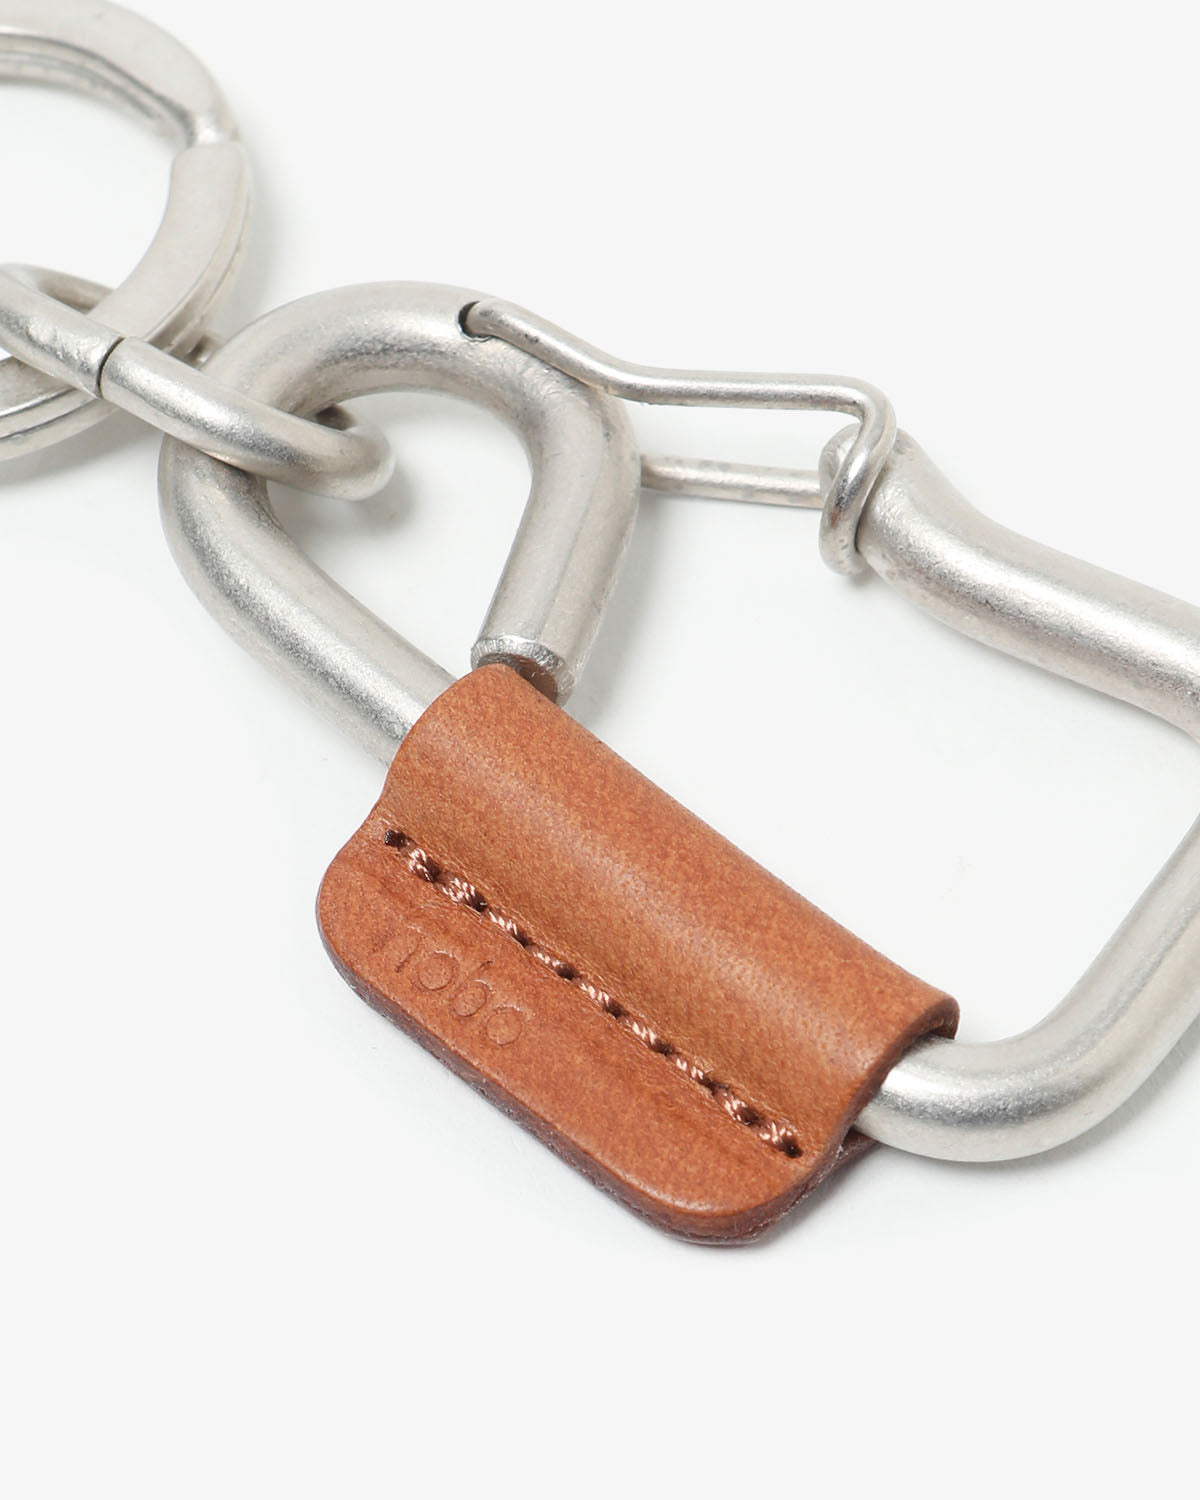 CARABINER KEY RING S with COW LEATHER